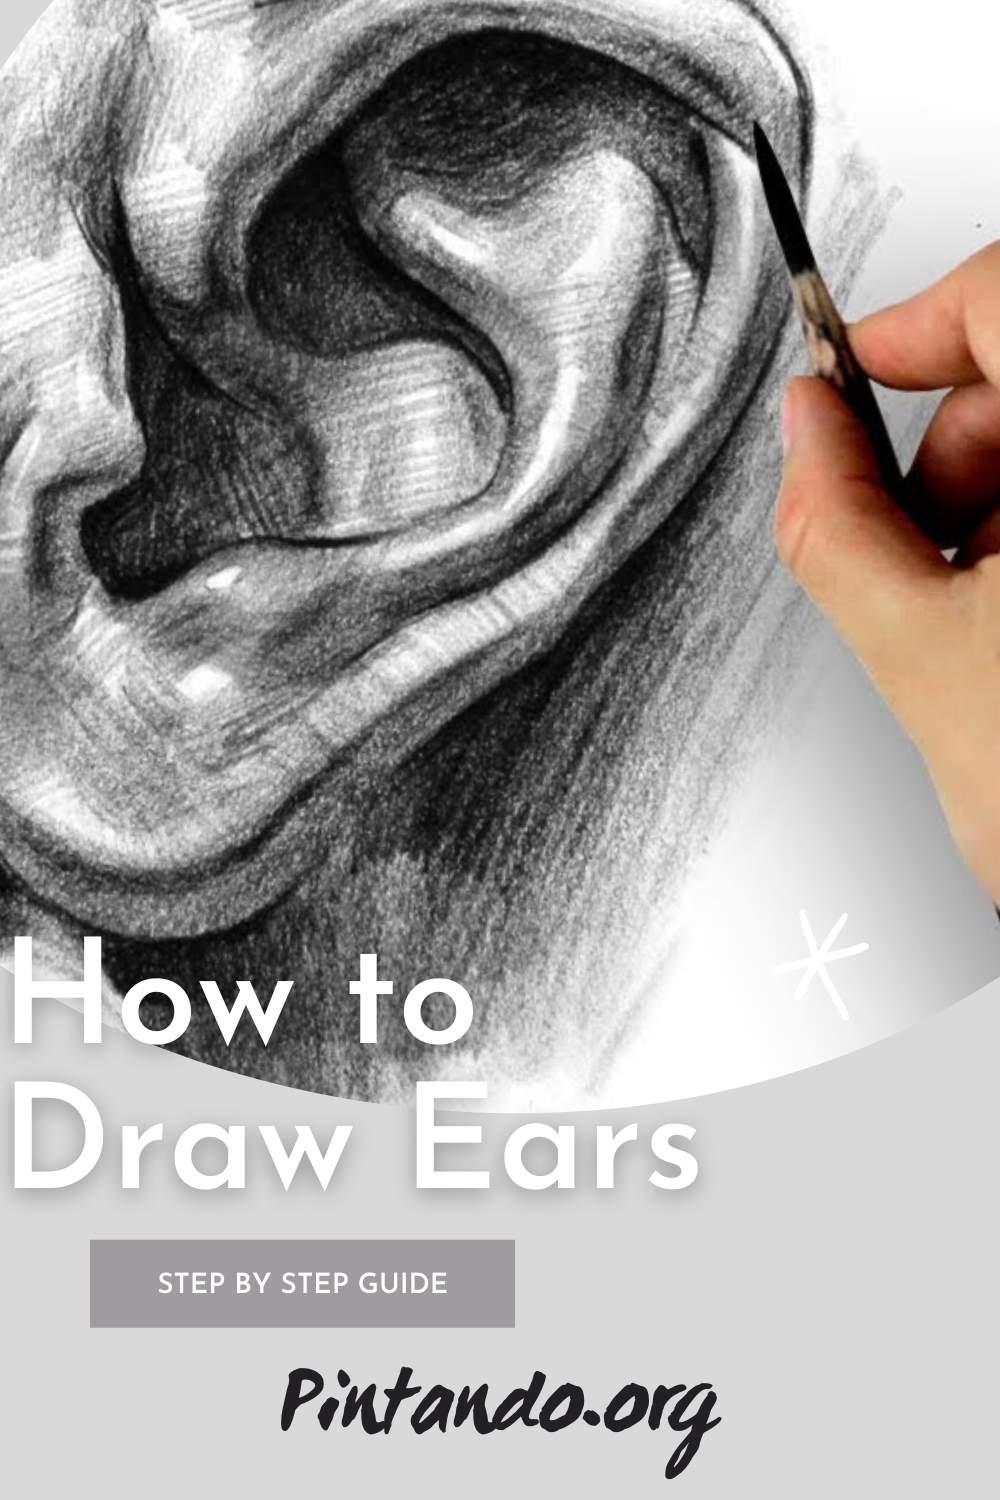 How to Draw Ears - Step by Step (1)